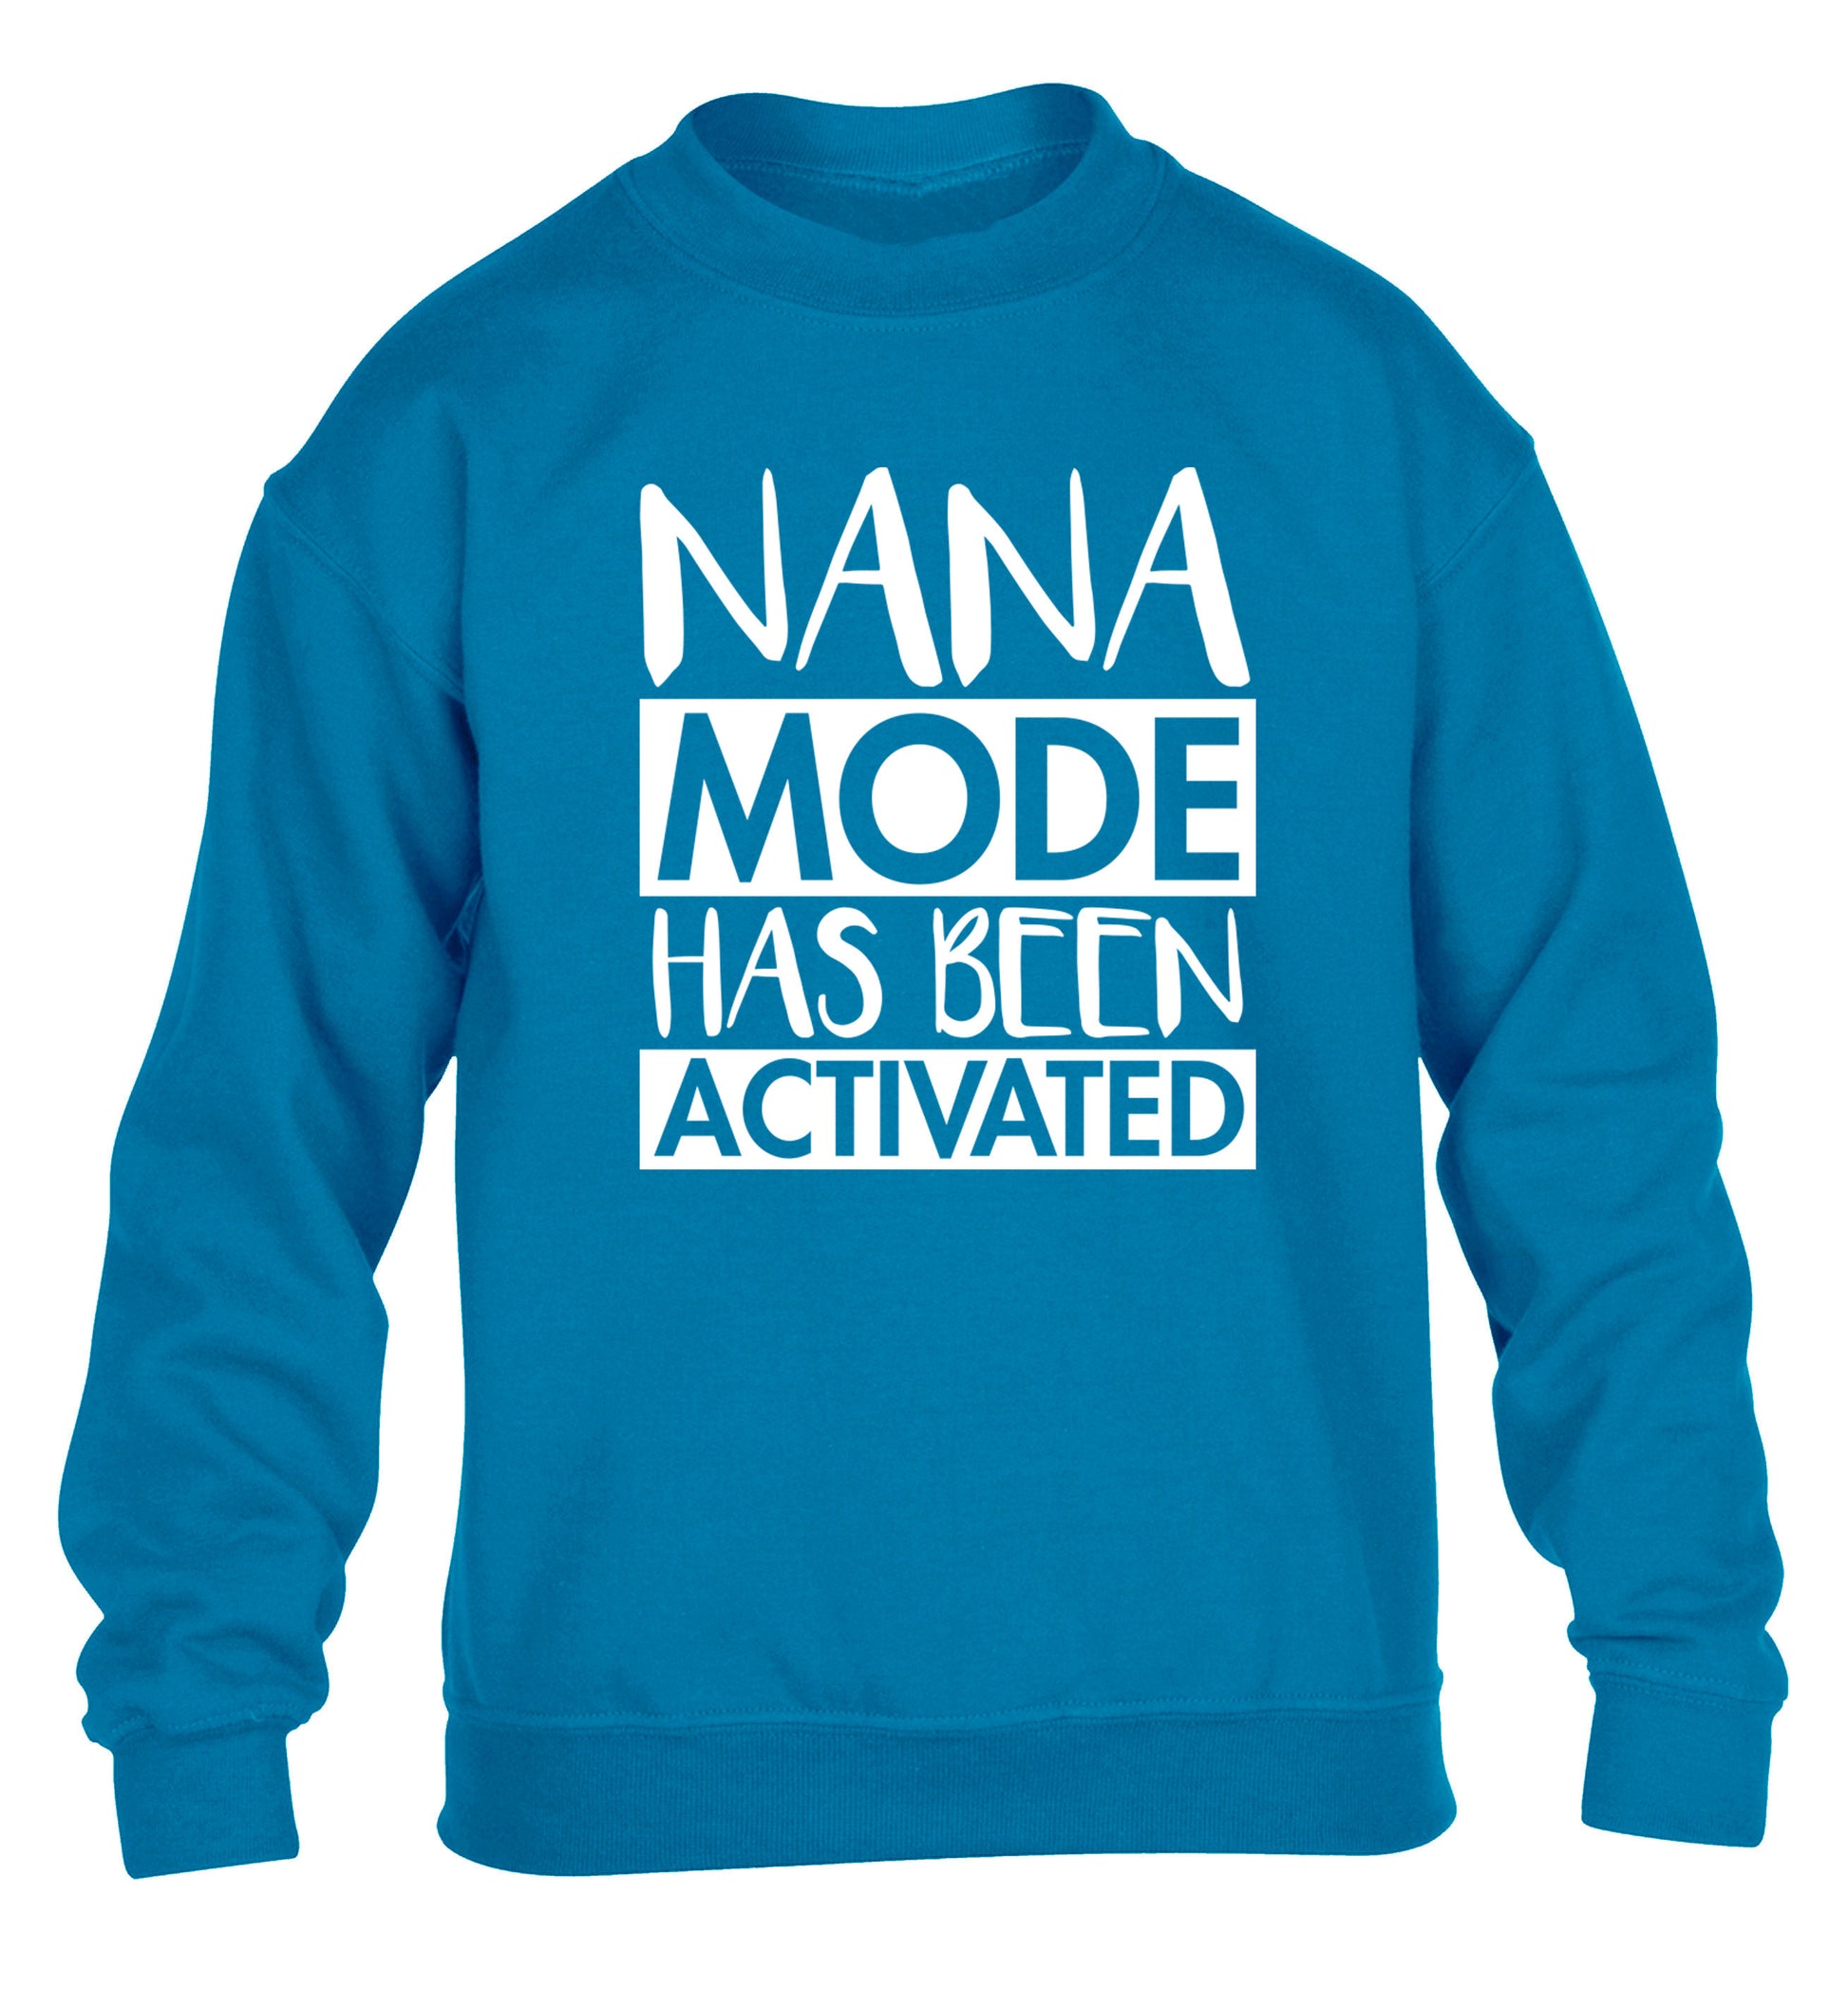 Nana mode activated children's blue sweater 12-14 Years